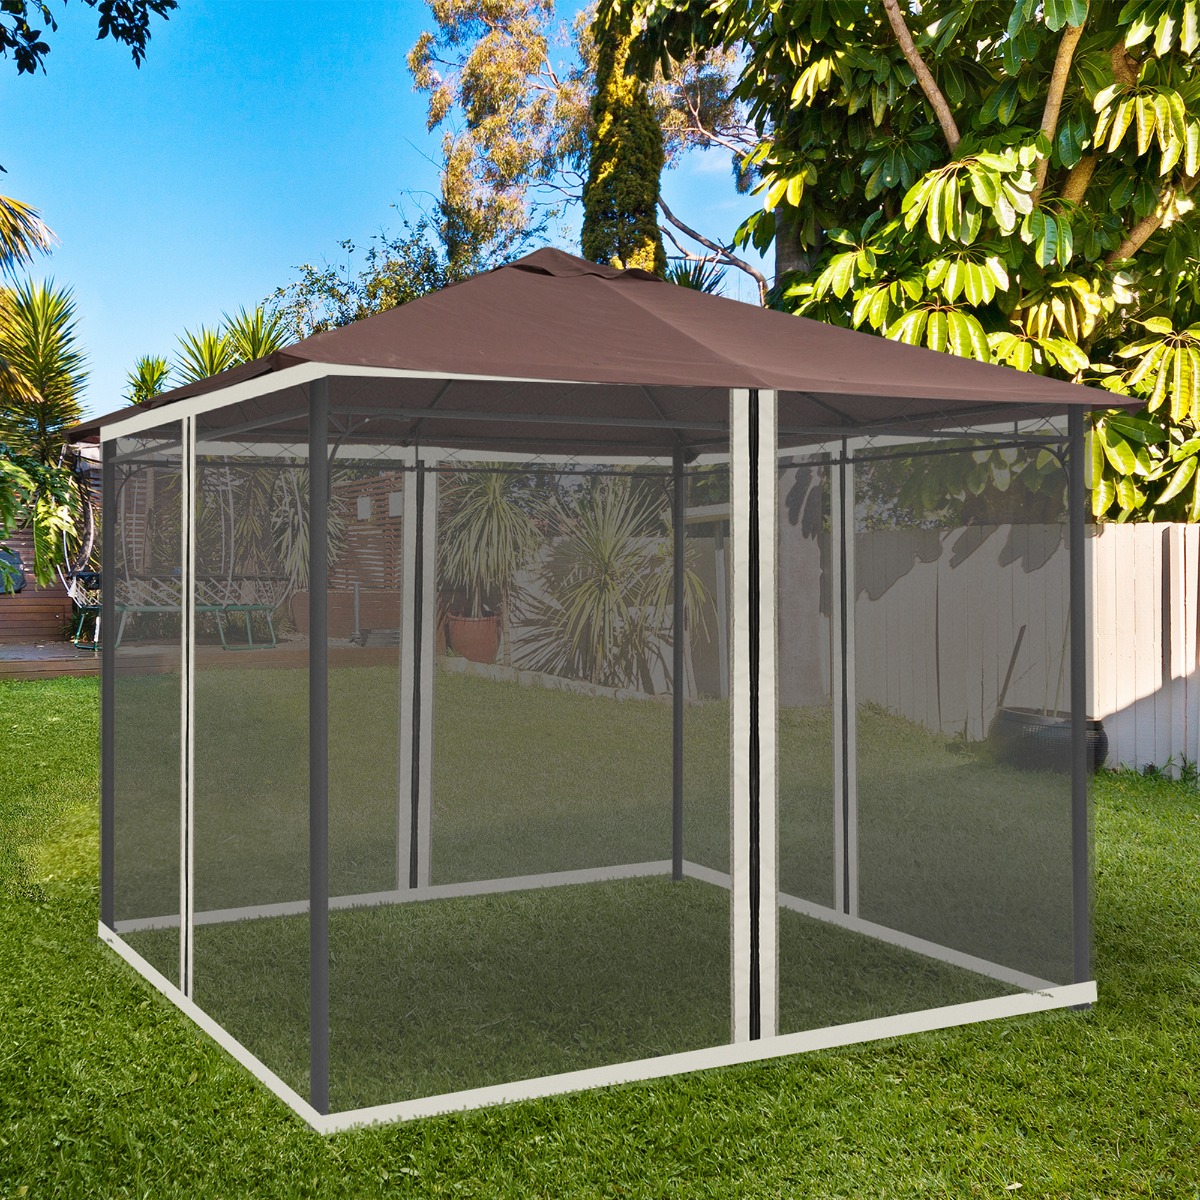 Outsunny Replacement Mesh Mosquito Netting Screen Walls for 10' x 10' Patio Gazebo,4-panel Sidewalls with Zippers